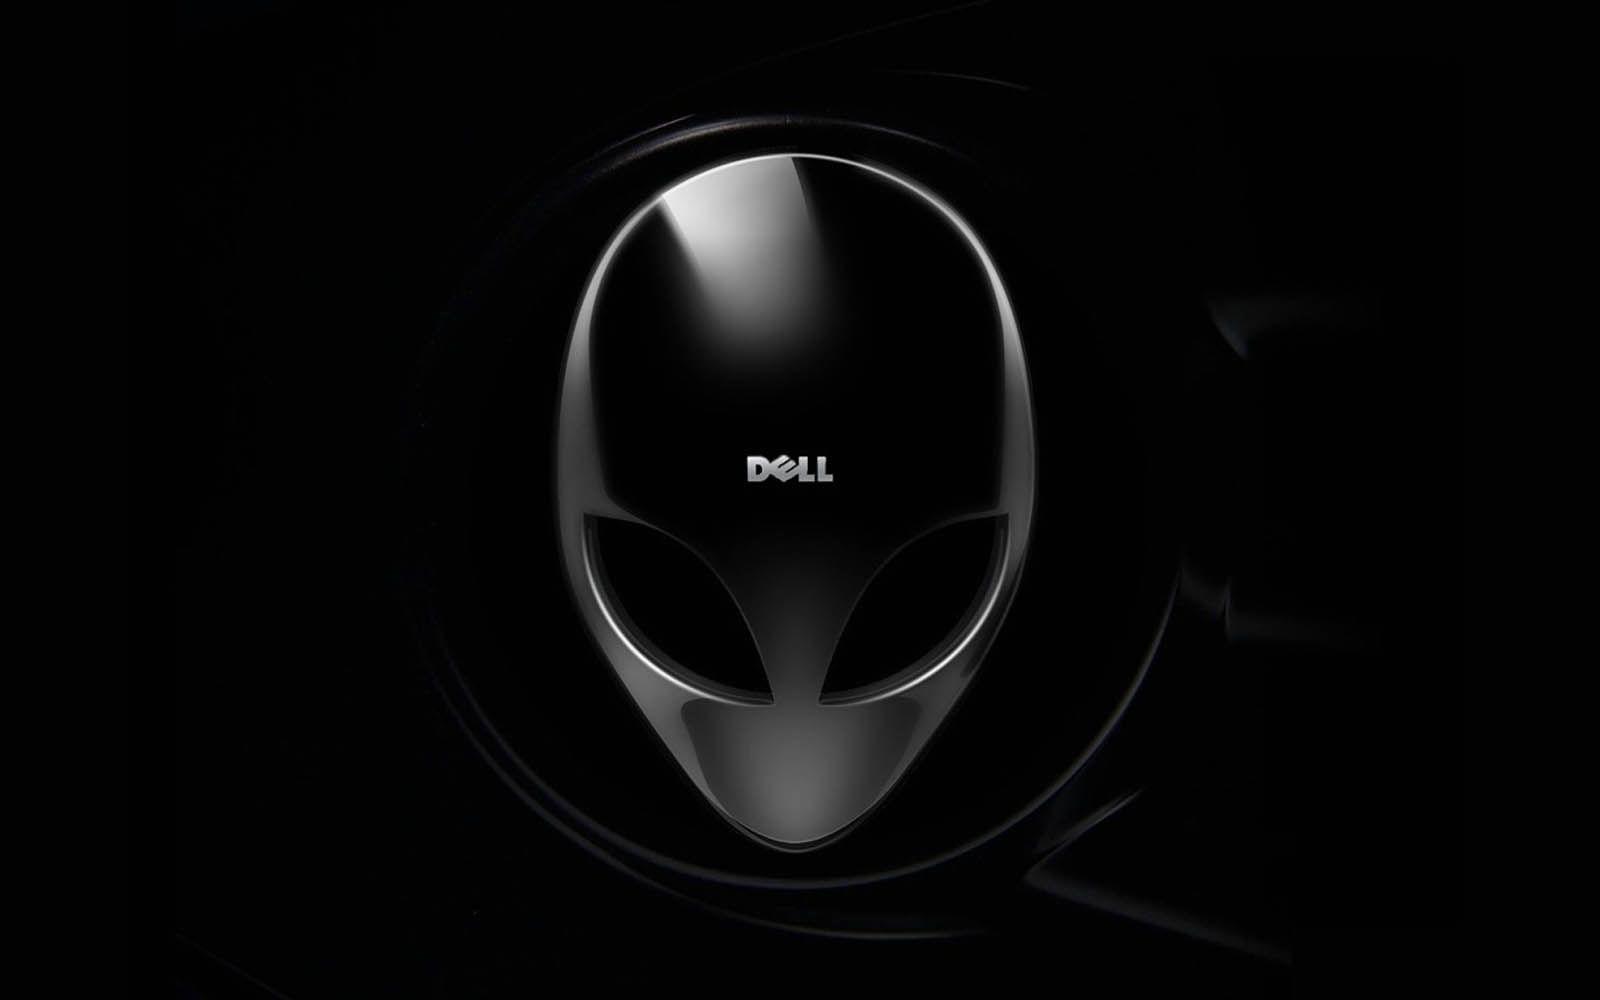  Dell  Wallpapers  Wallpaper  Cave